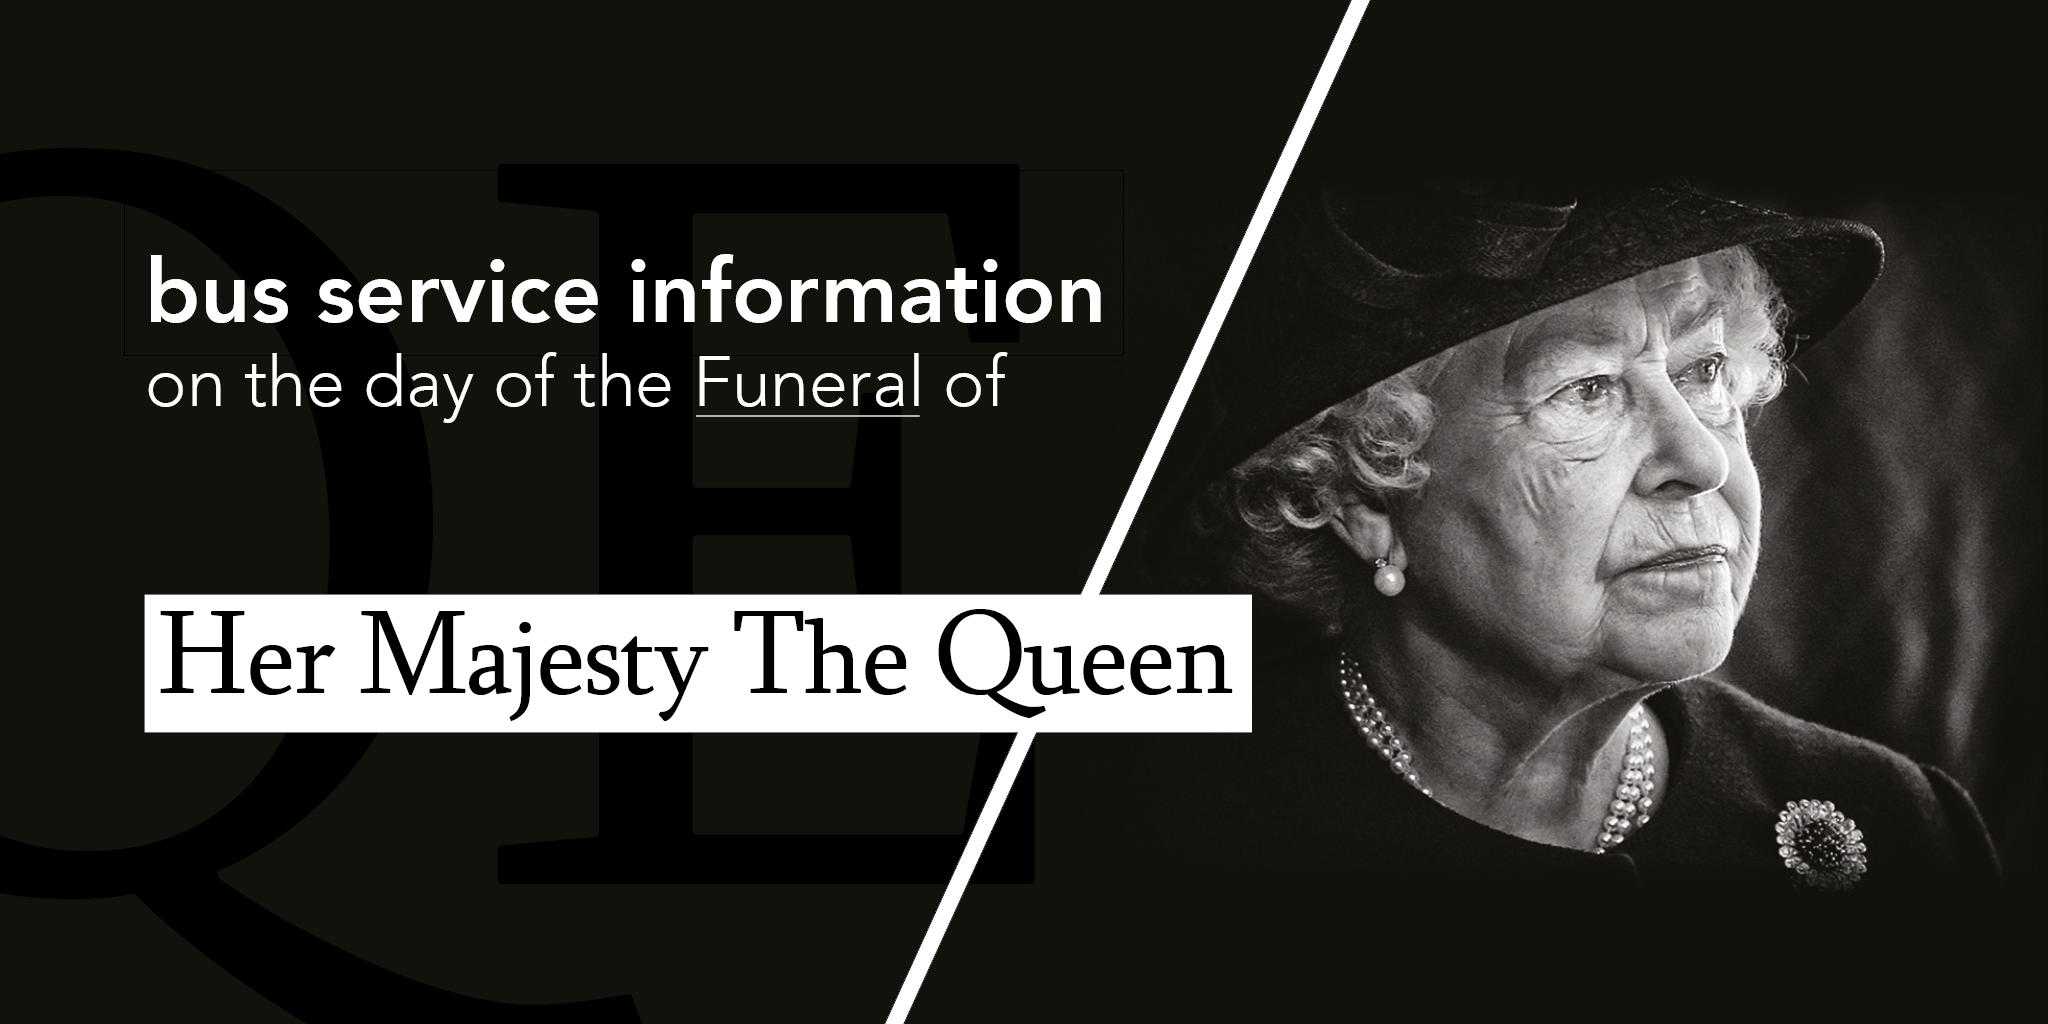 Sunday services timetable on the day of the funeral for Her Majesty Queen Elizabeth II